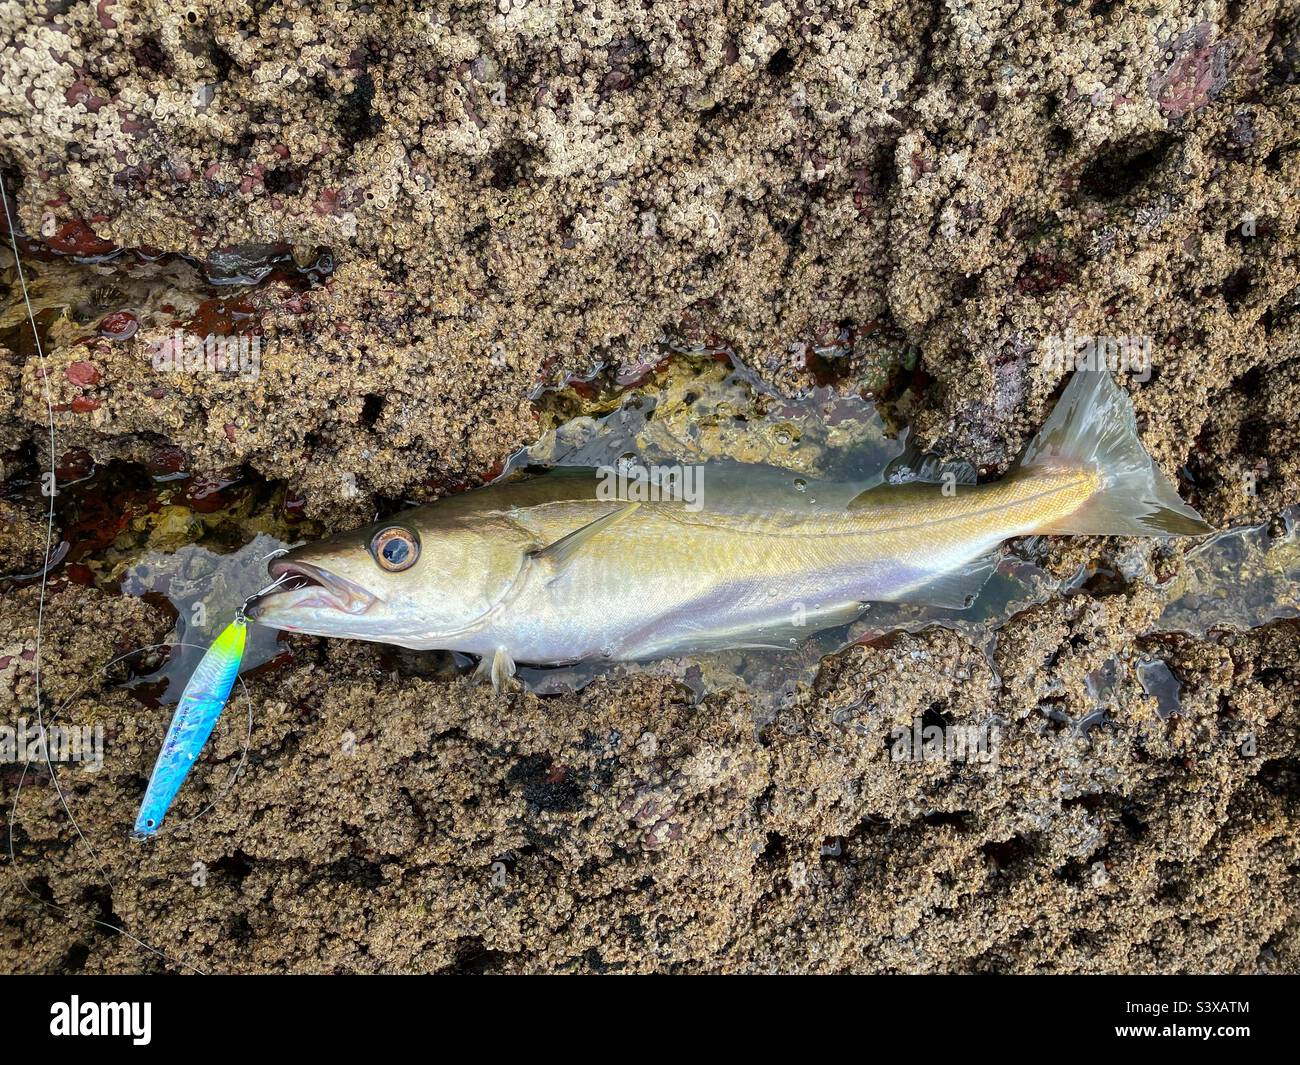 A Pollack (Pollachius pollachius) caught on a lure from the shore in Wales on barnacle covered rocks. Stock Photo